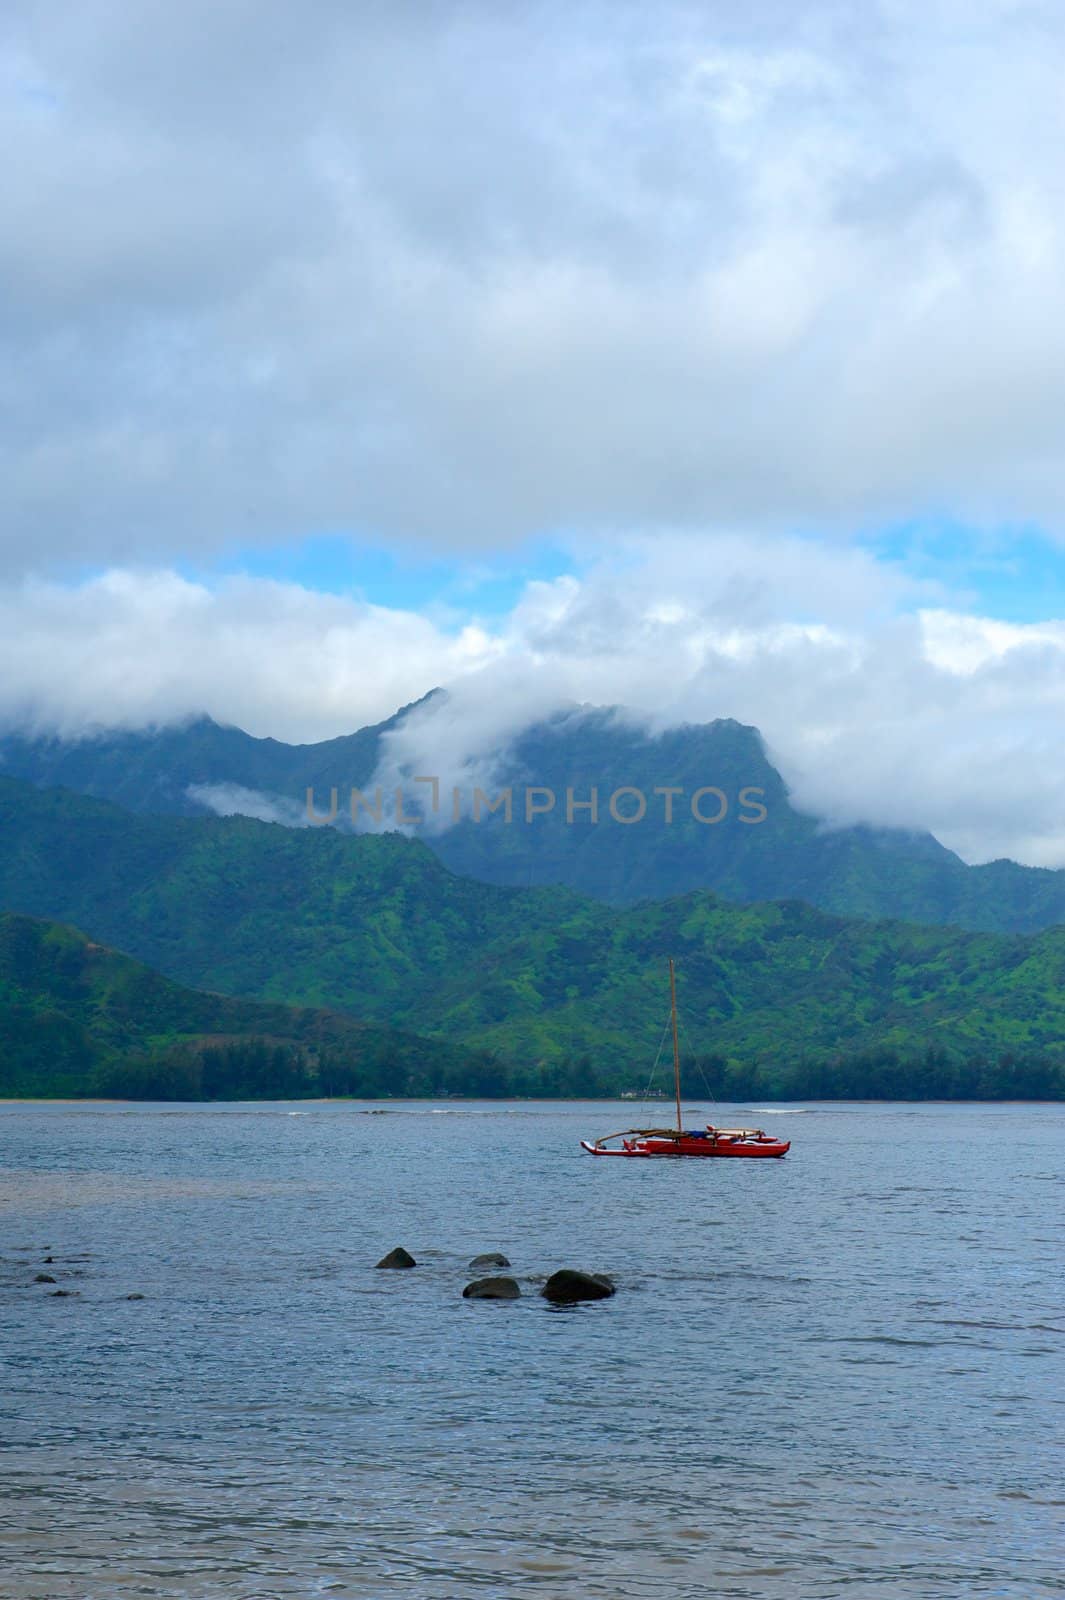 A Red Catamaran Off the Coastline of Kauaii by pixelsnap